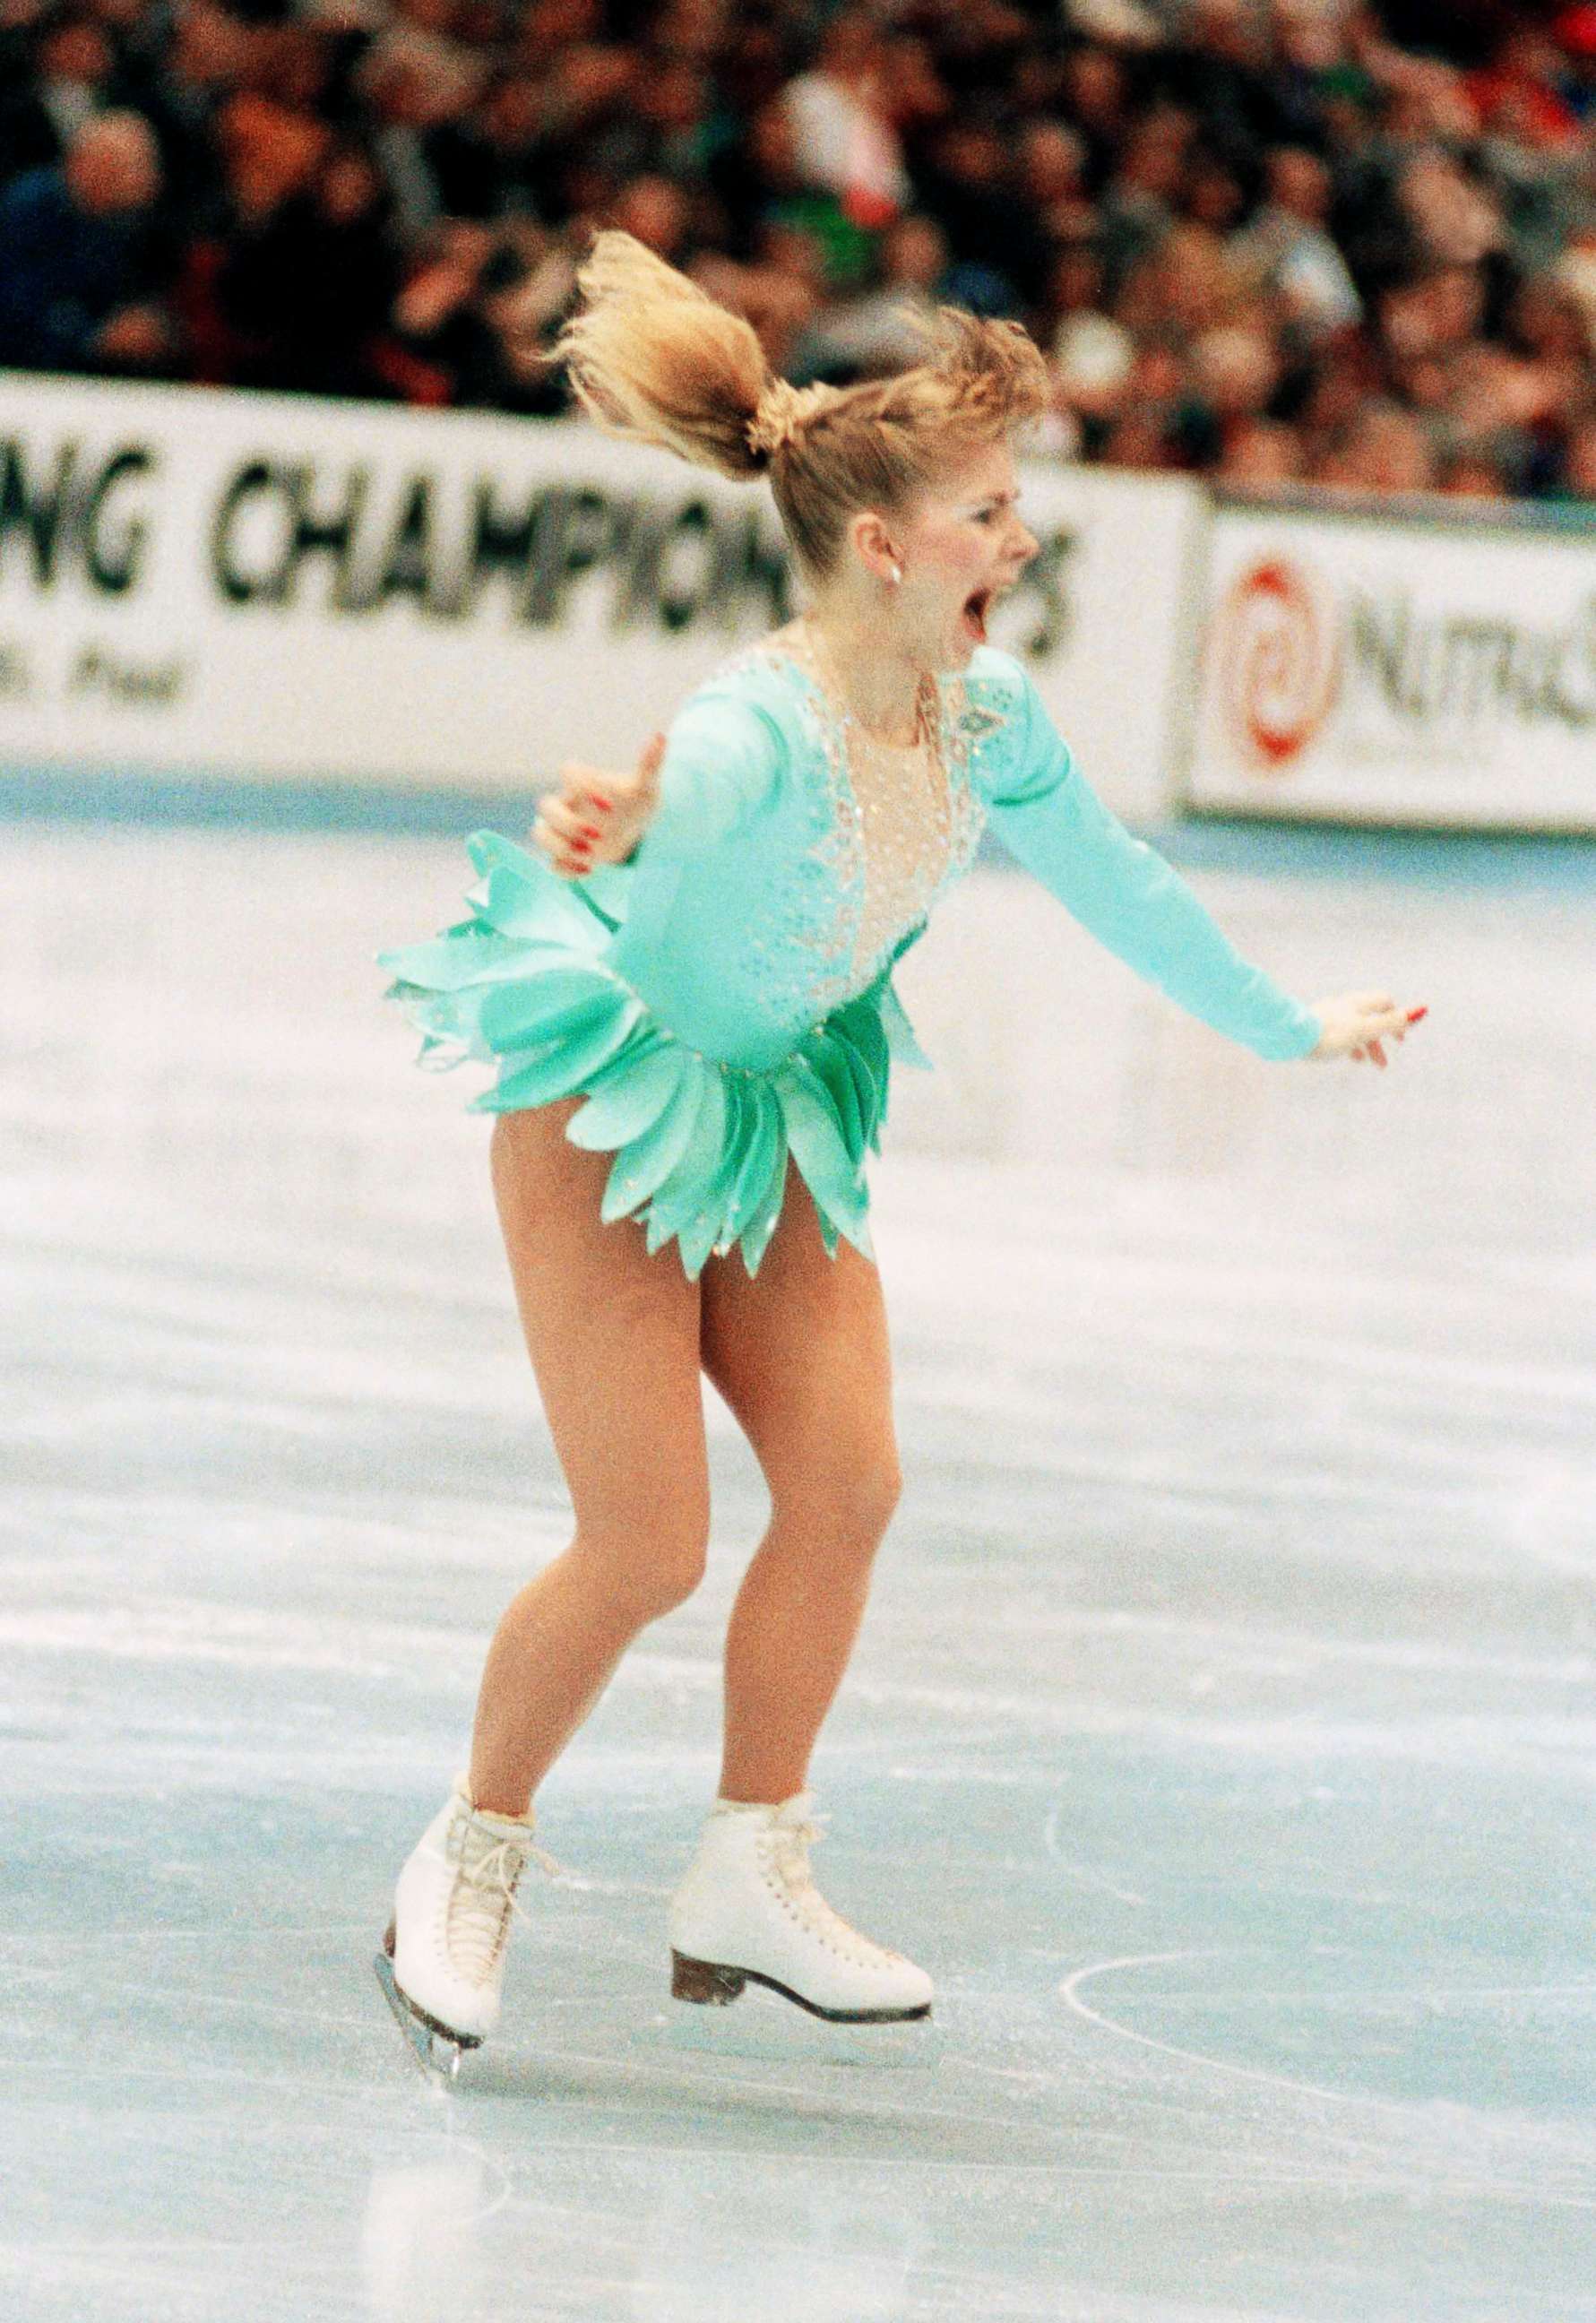 PHOTO: A jubilant Tonya Harding is acknowledged by the crowd as she comes out of her successful triple axel on her way to winning the U.S. Figure Skating Championships on Feb. 16, 1991, in Minneapolis. 